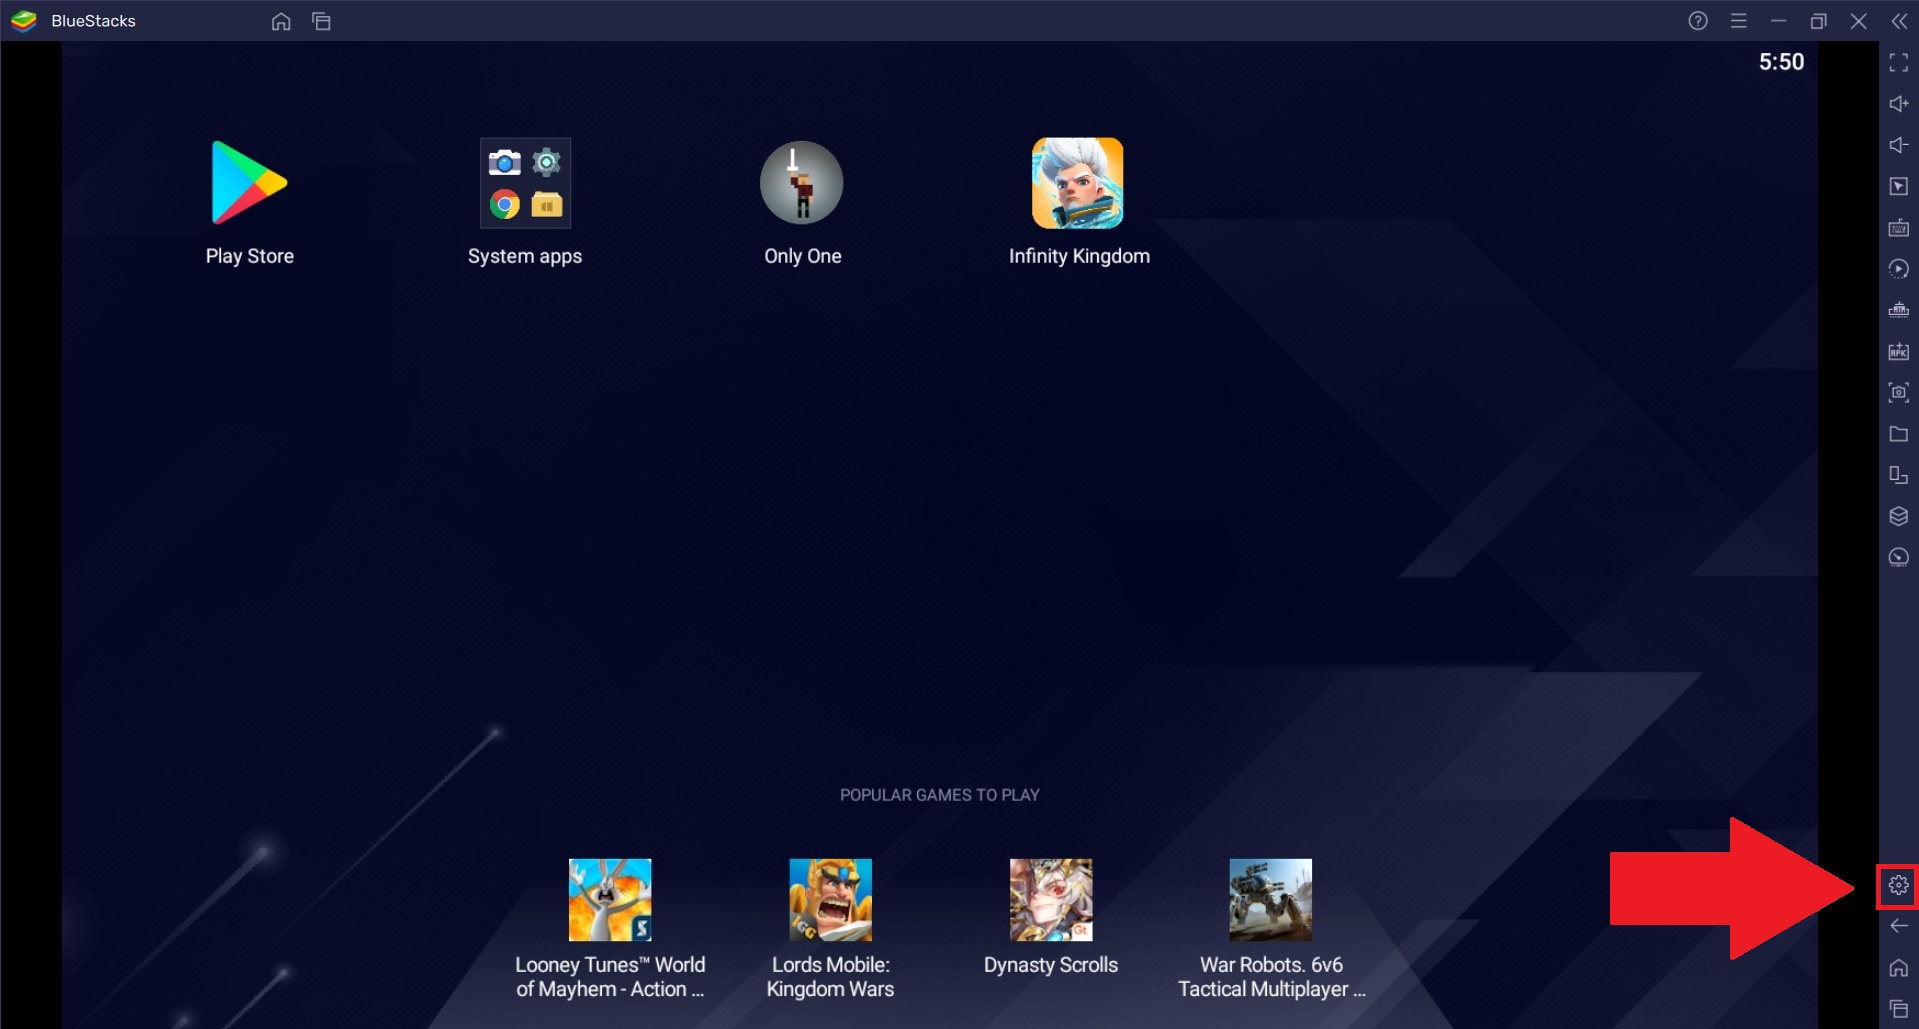 How to Play FPS Games on BlueStacks